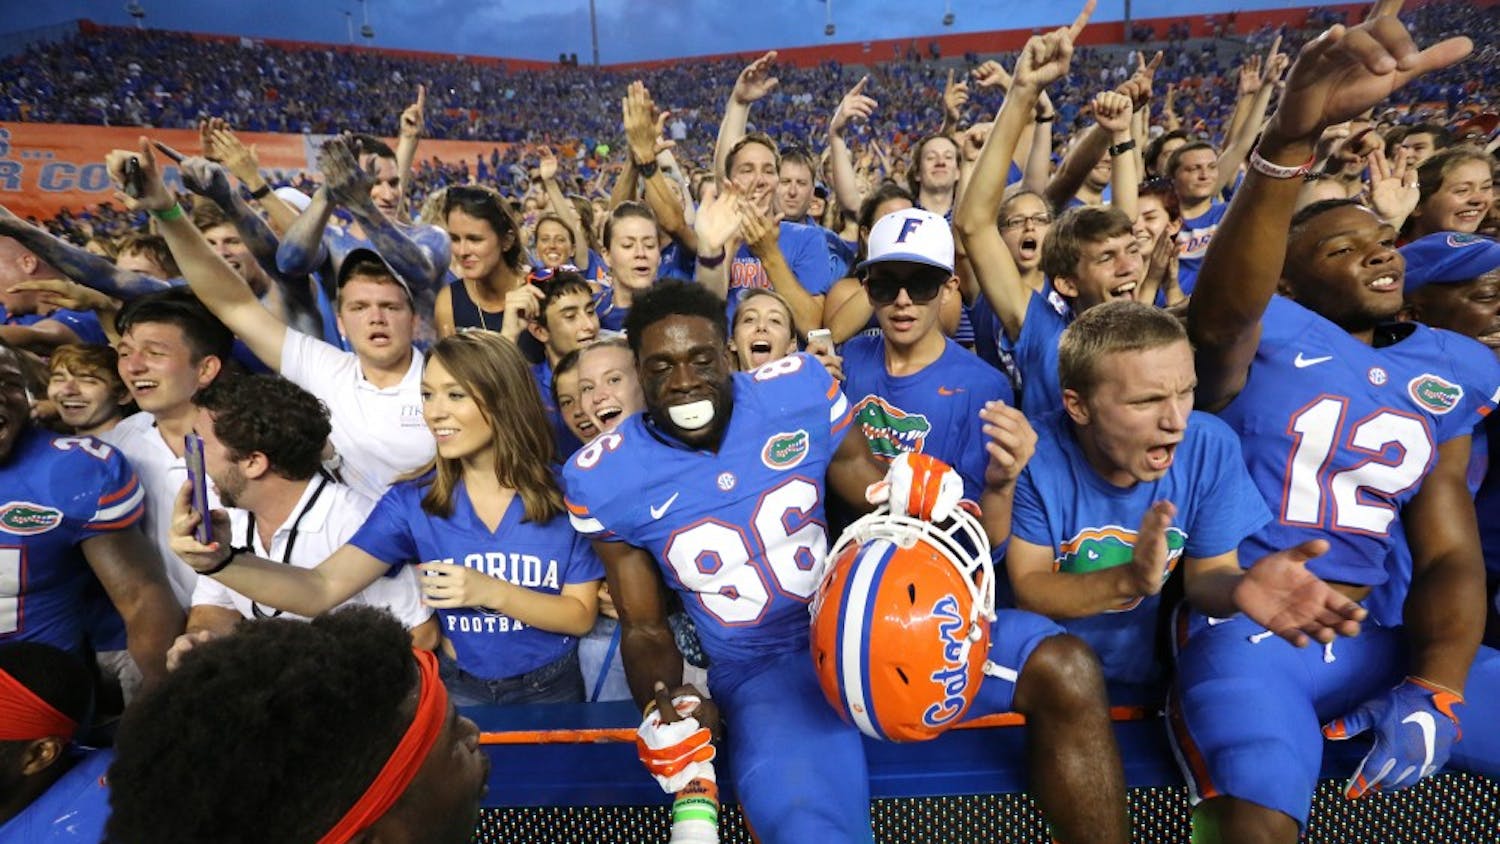 Florida players celebrate after a come-from-behind 28-27 win against Tennessee at Ben Hill Griffin Stadium in Gainesville, Fla., on Saturday, Sept. 26, 2015. (Joe Burbank/Orlando Sentinel/TNS)